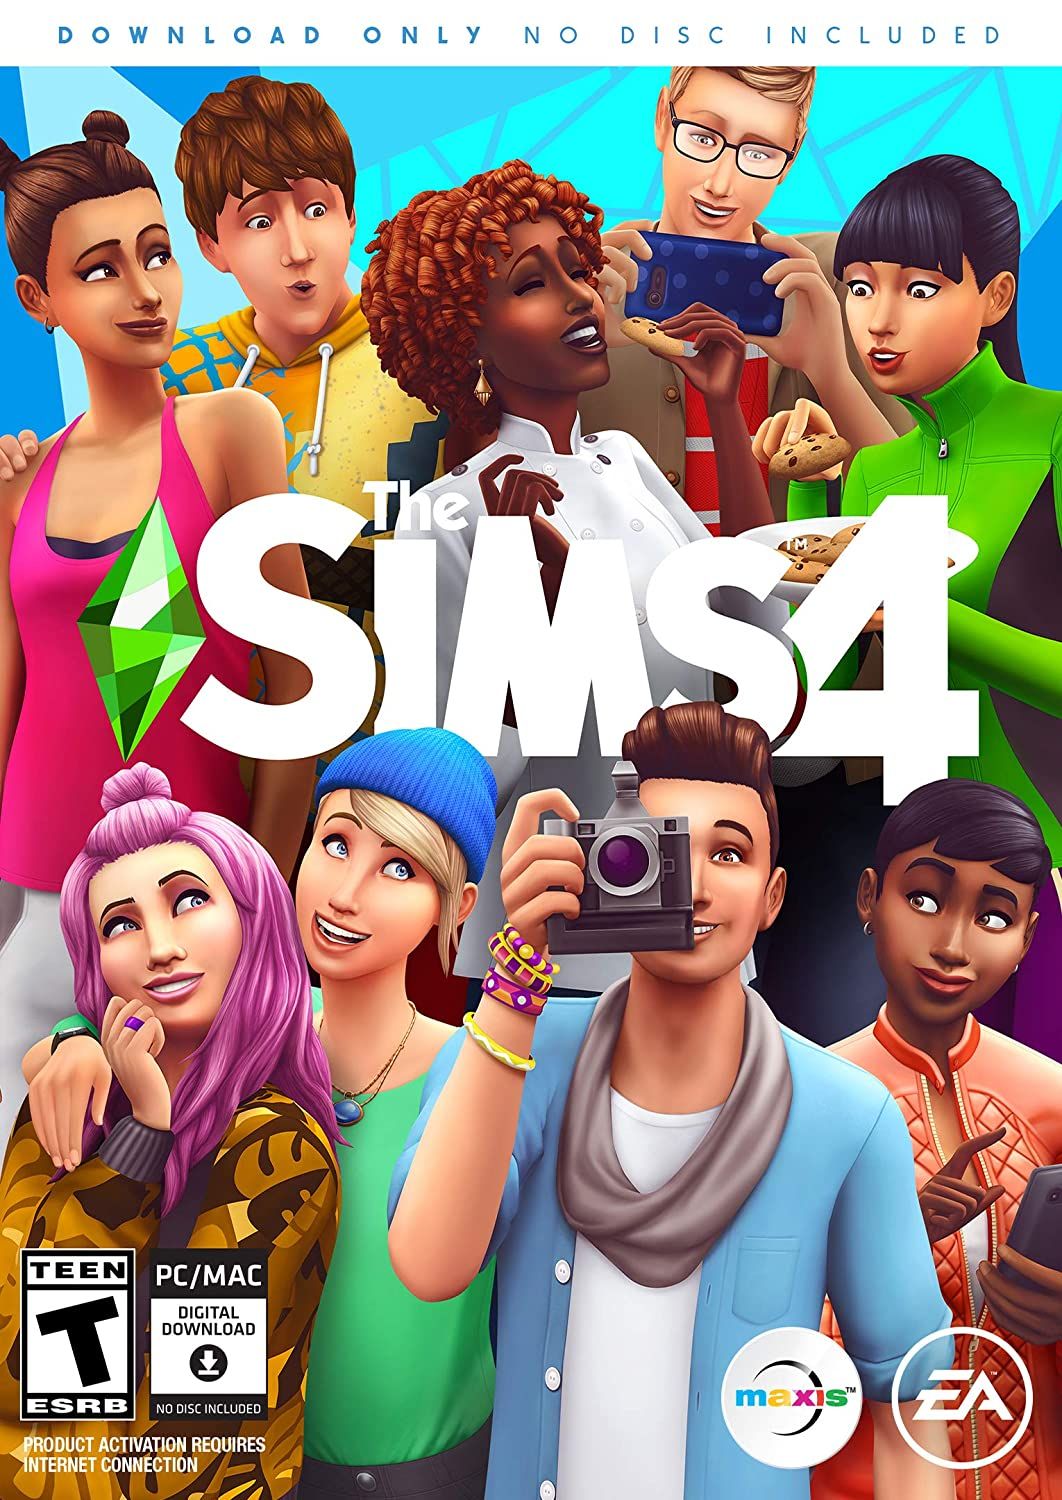 The Sims 4 is the best sandbox video game